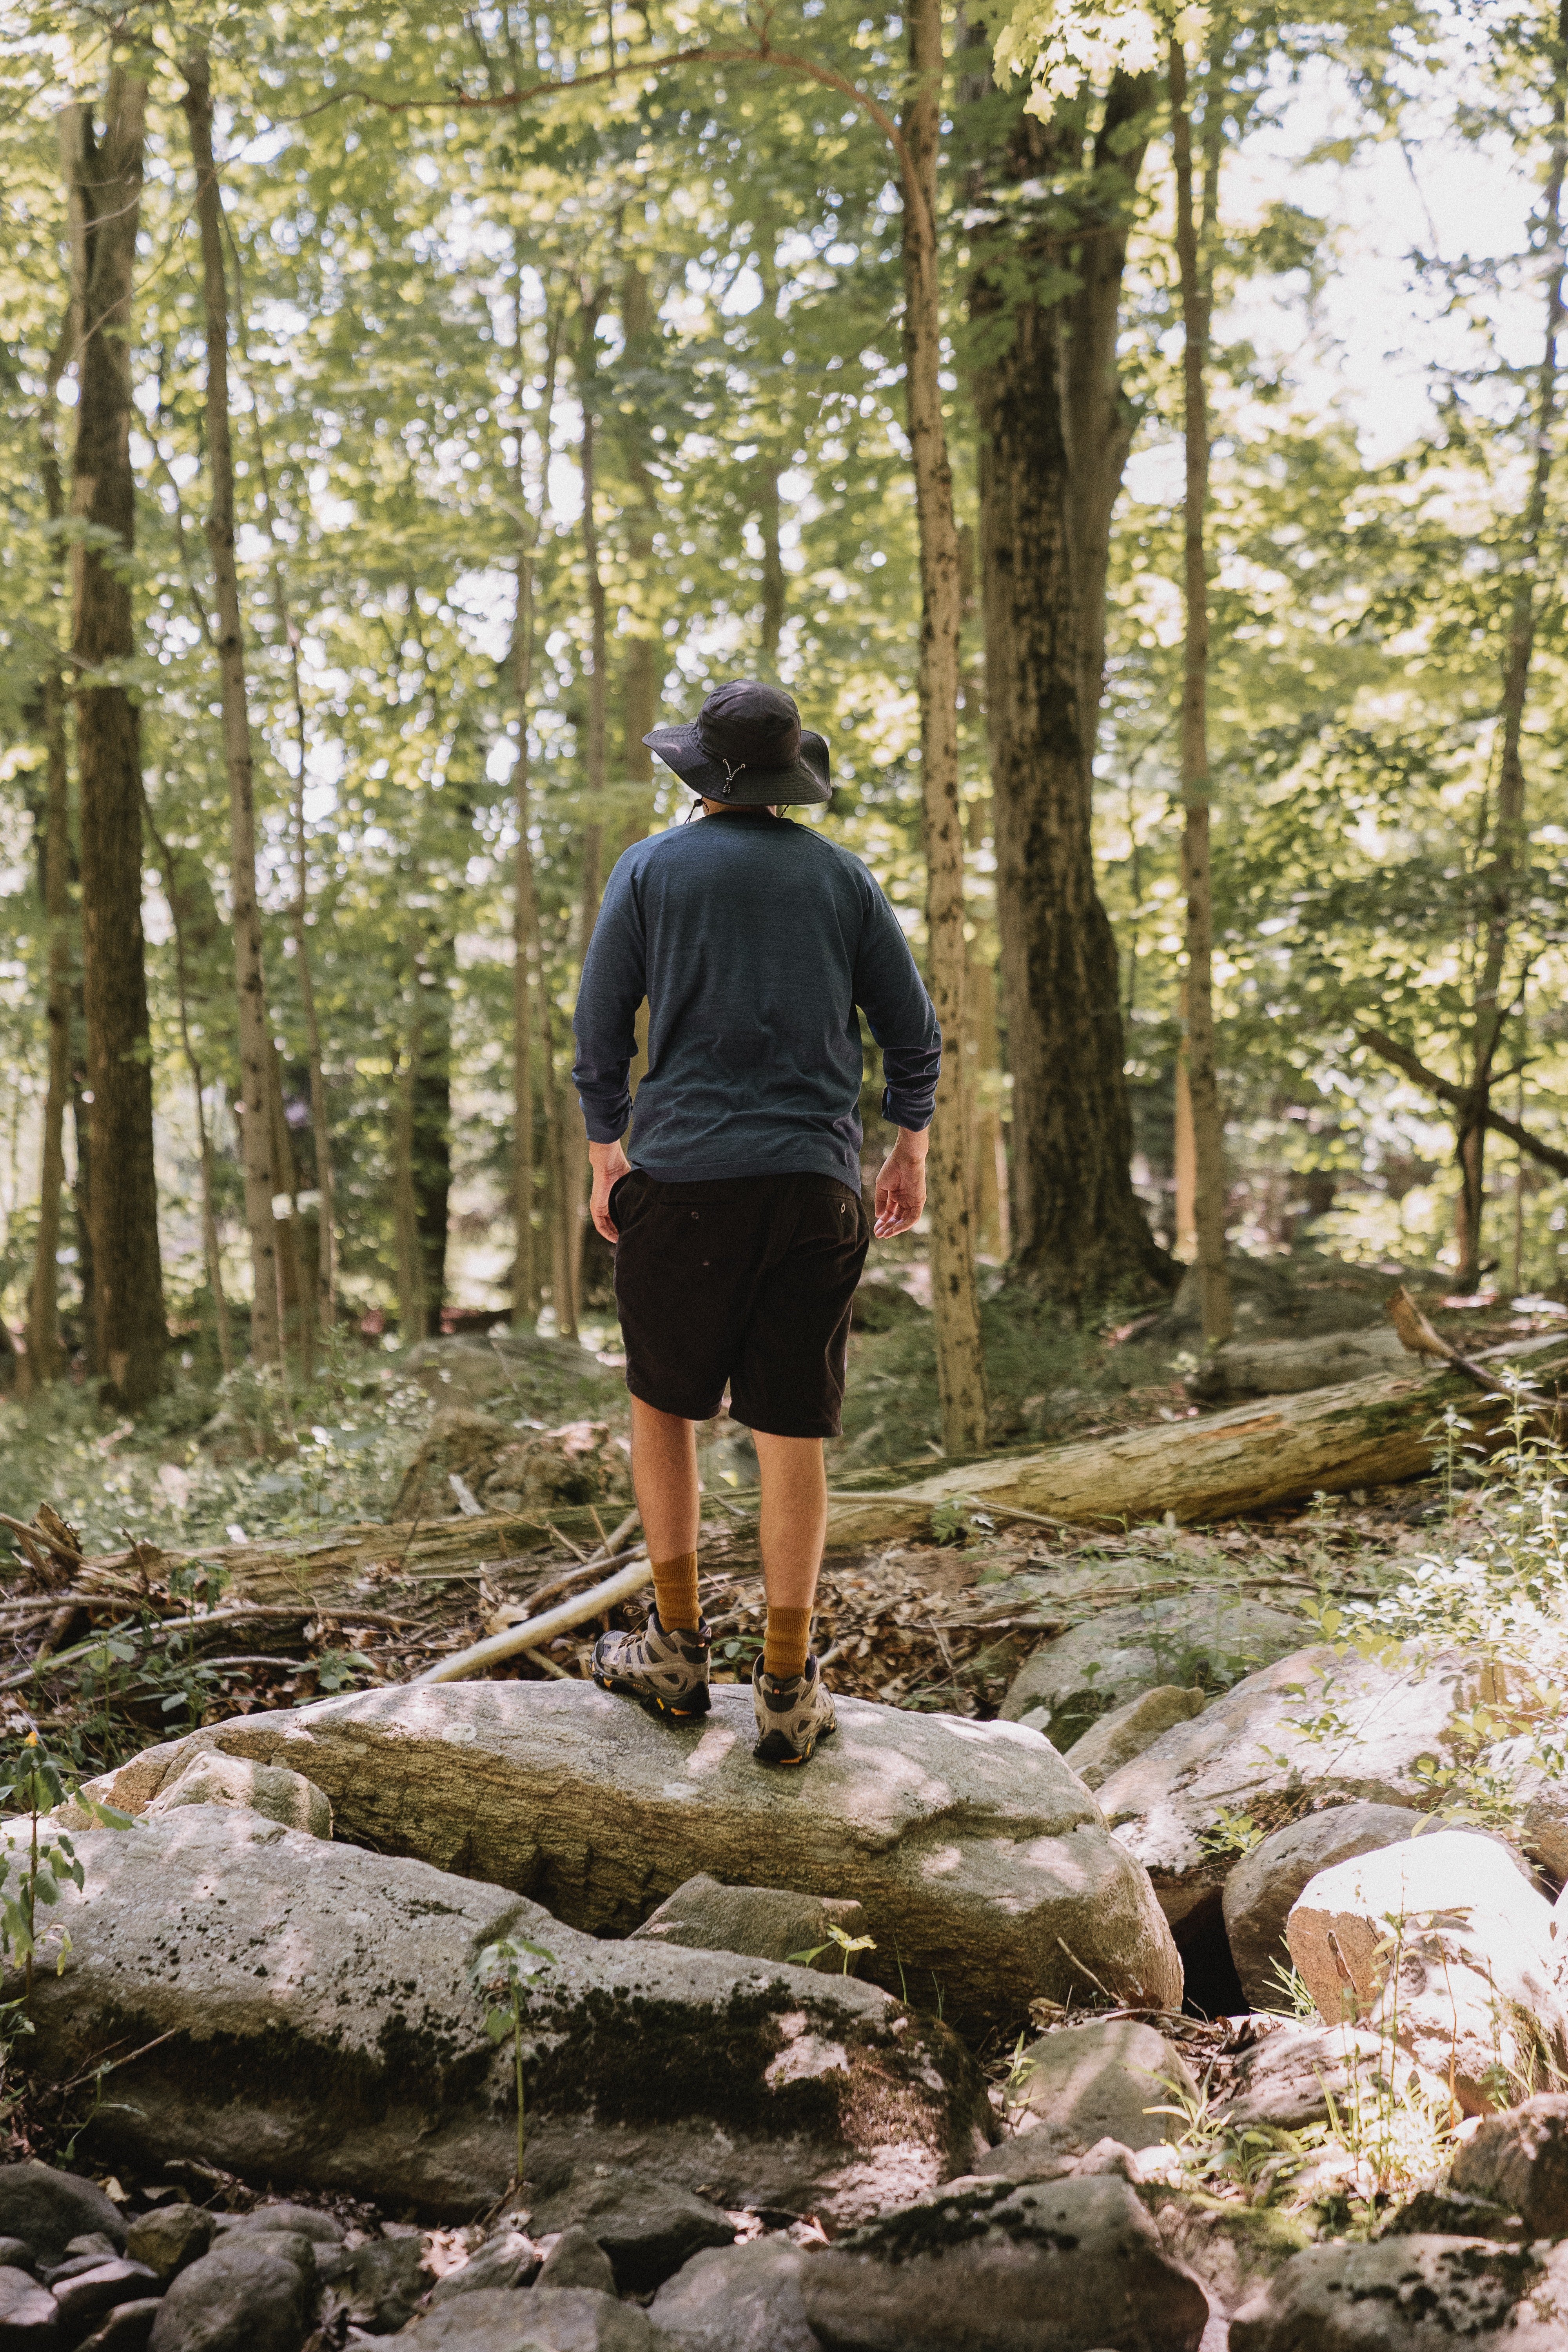 A man called out for Max from the woods. | Source: Pexels